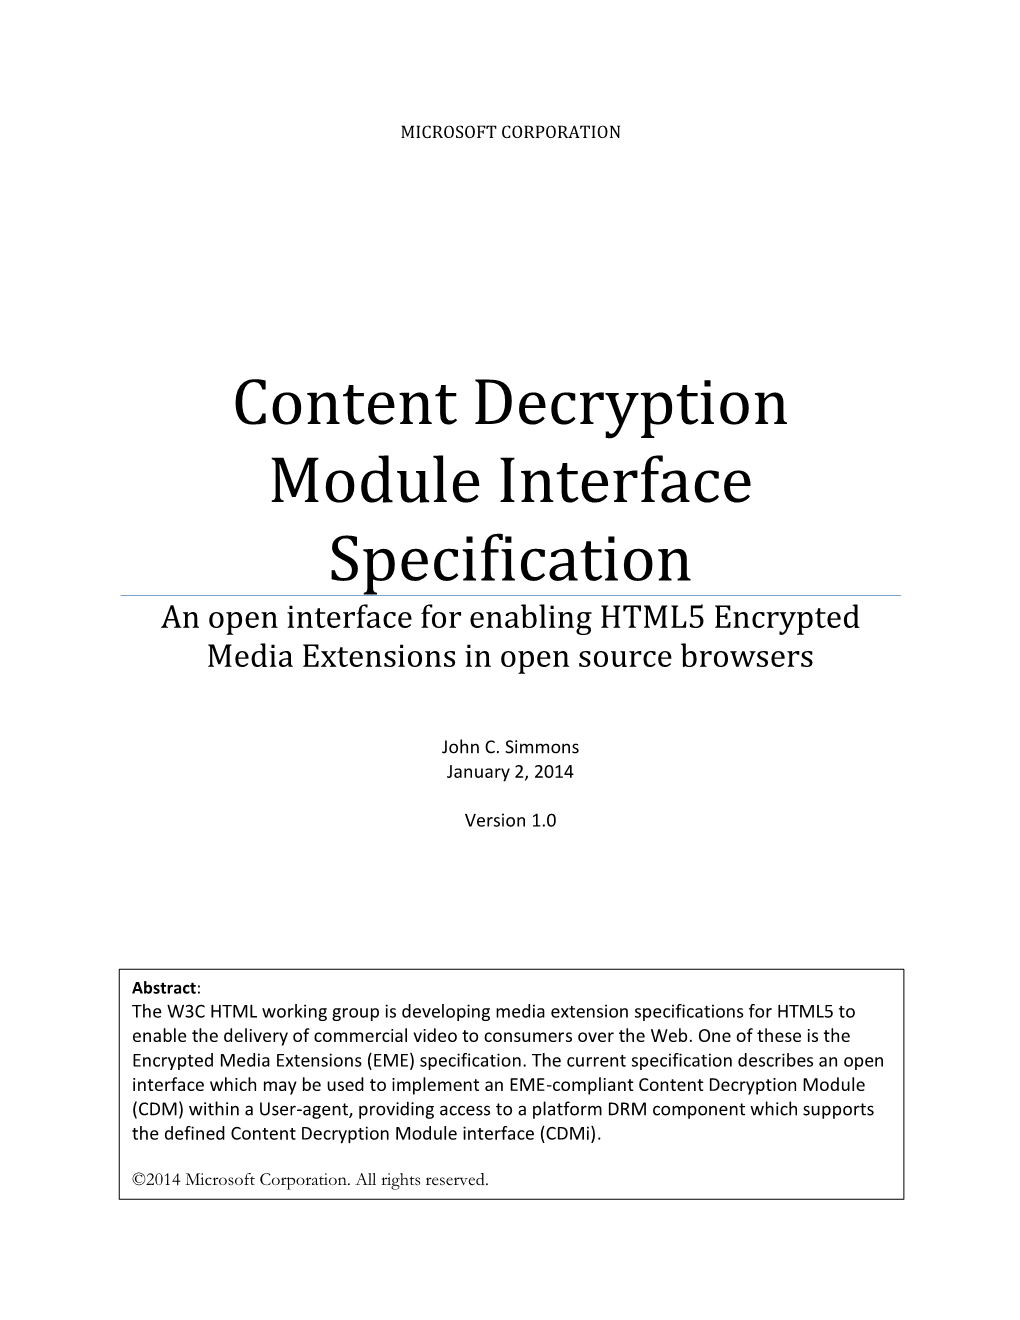 Content Decryption Module Interface Specification an Open Interface for Enabling HTML5 Encrypted Media Extensions in Open Source Browsers